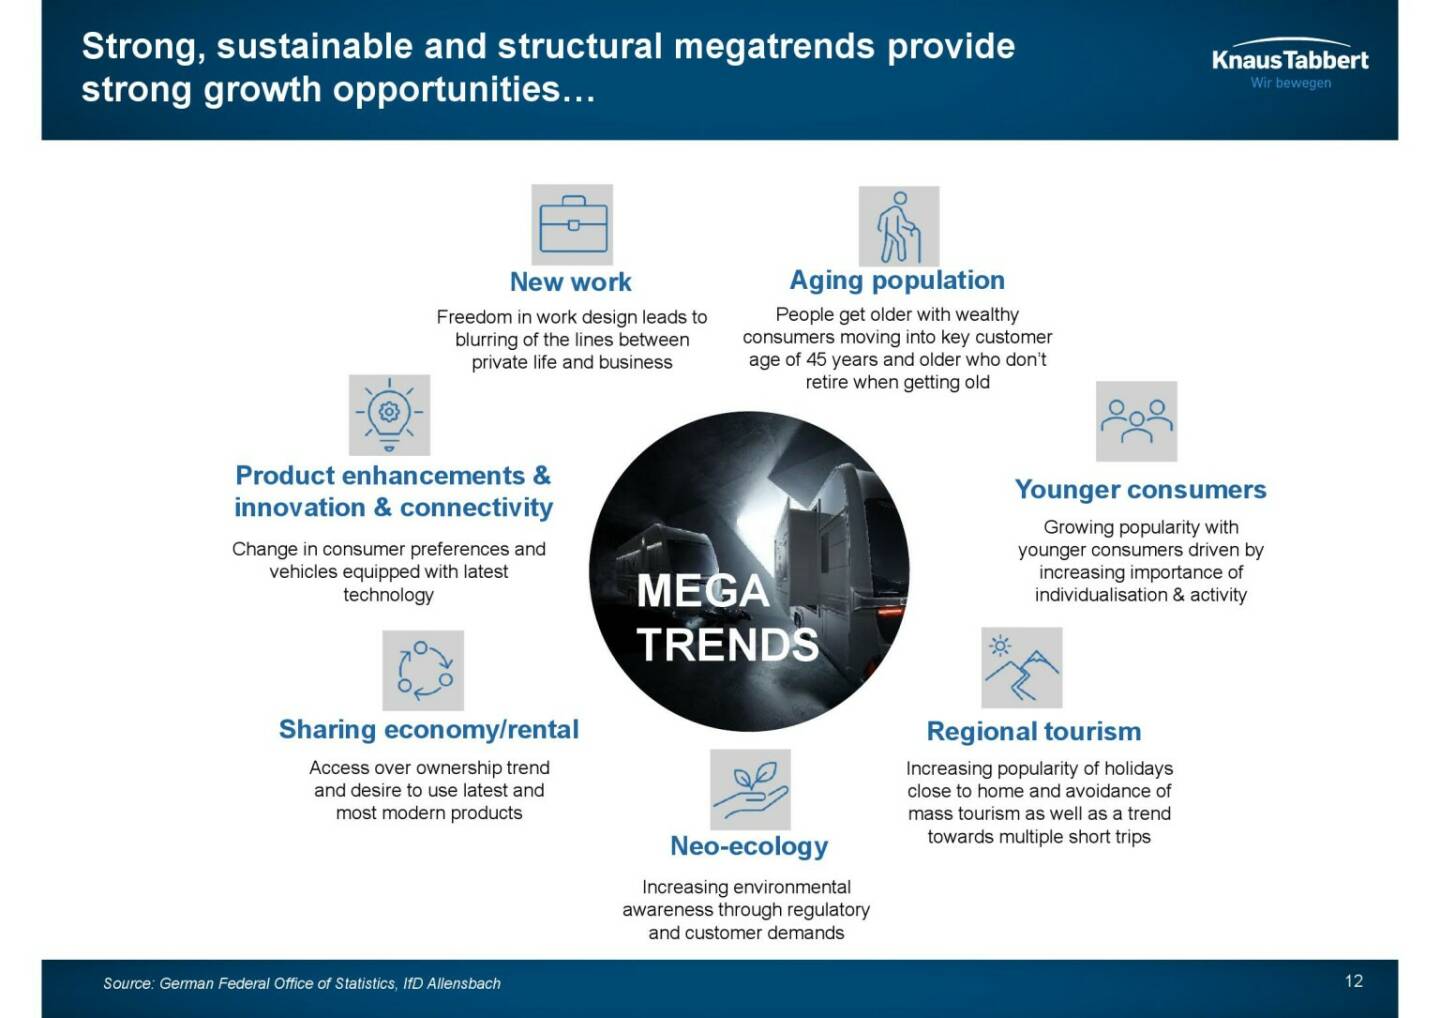 Knaus Tabbert - Strong, sustainable  and structural megatrends provide strong growth opportunities...